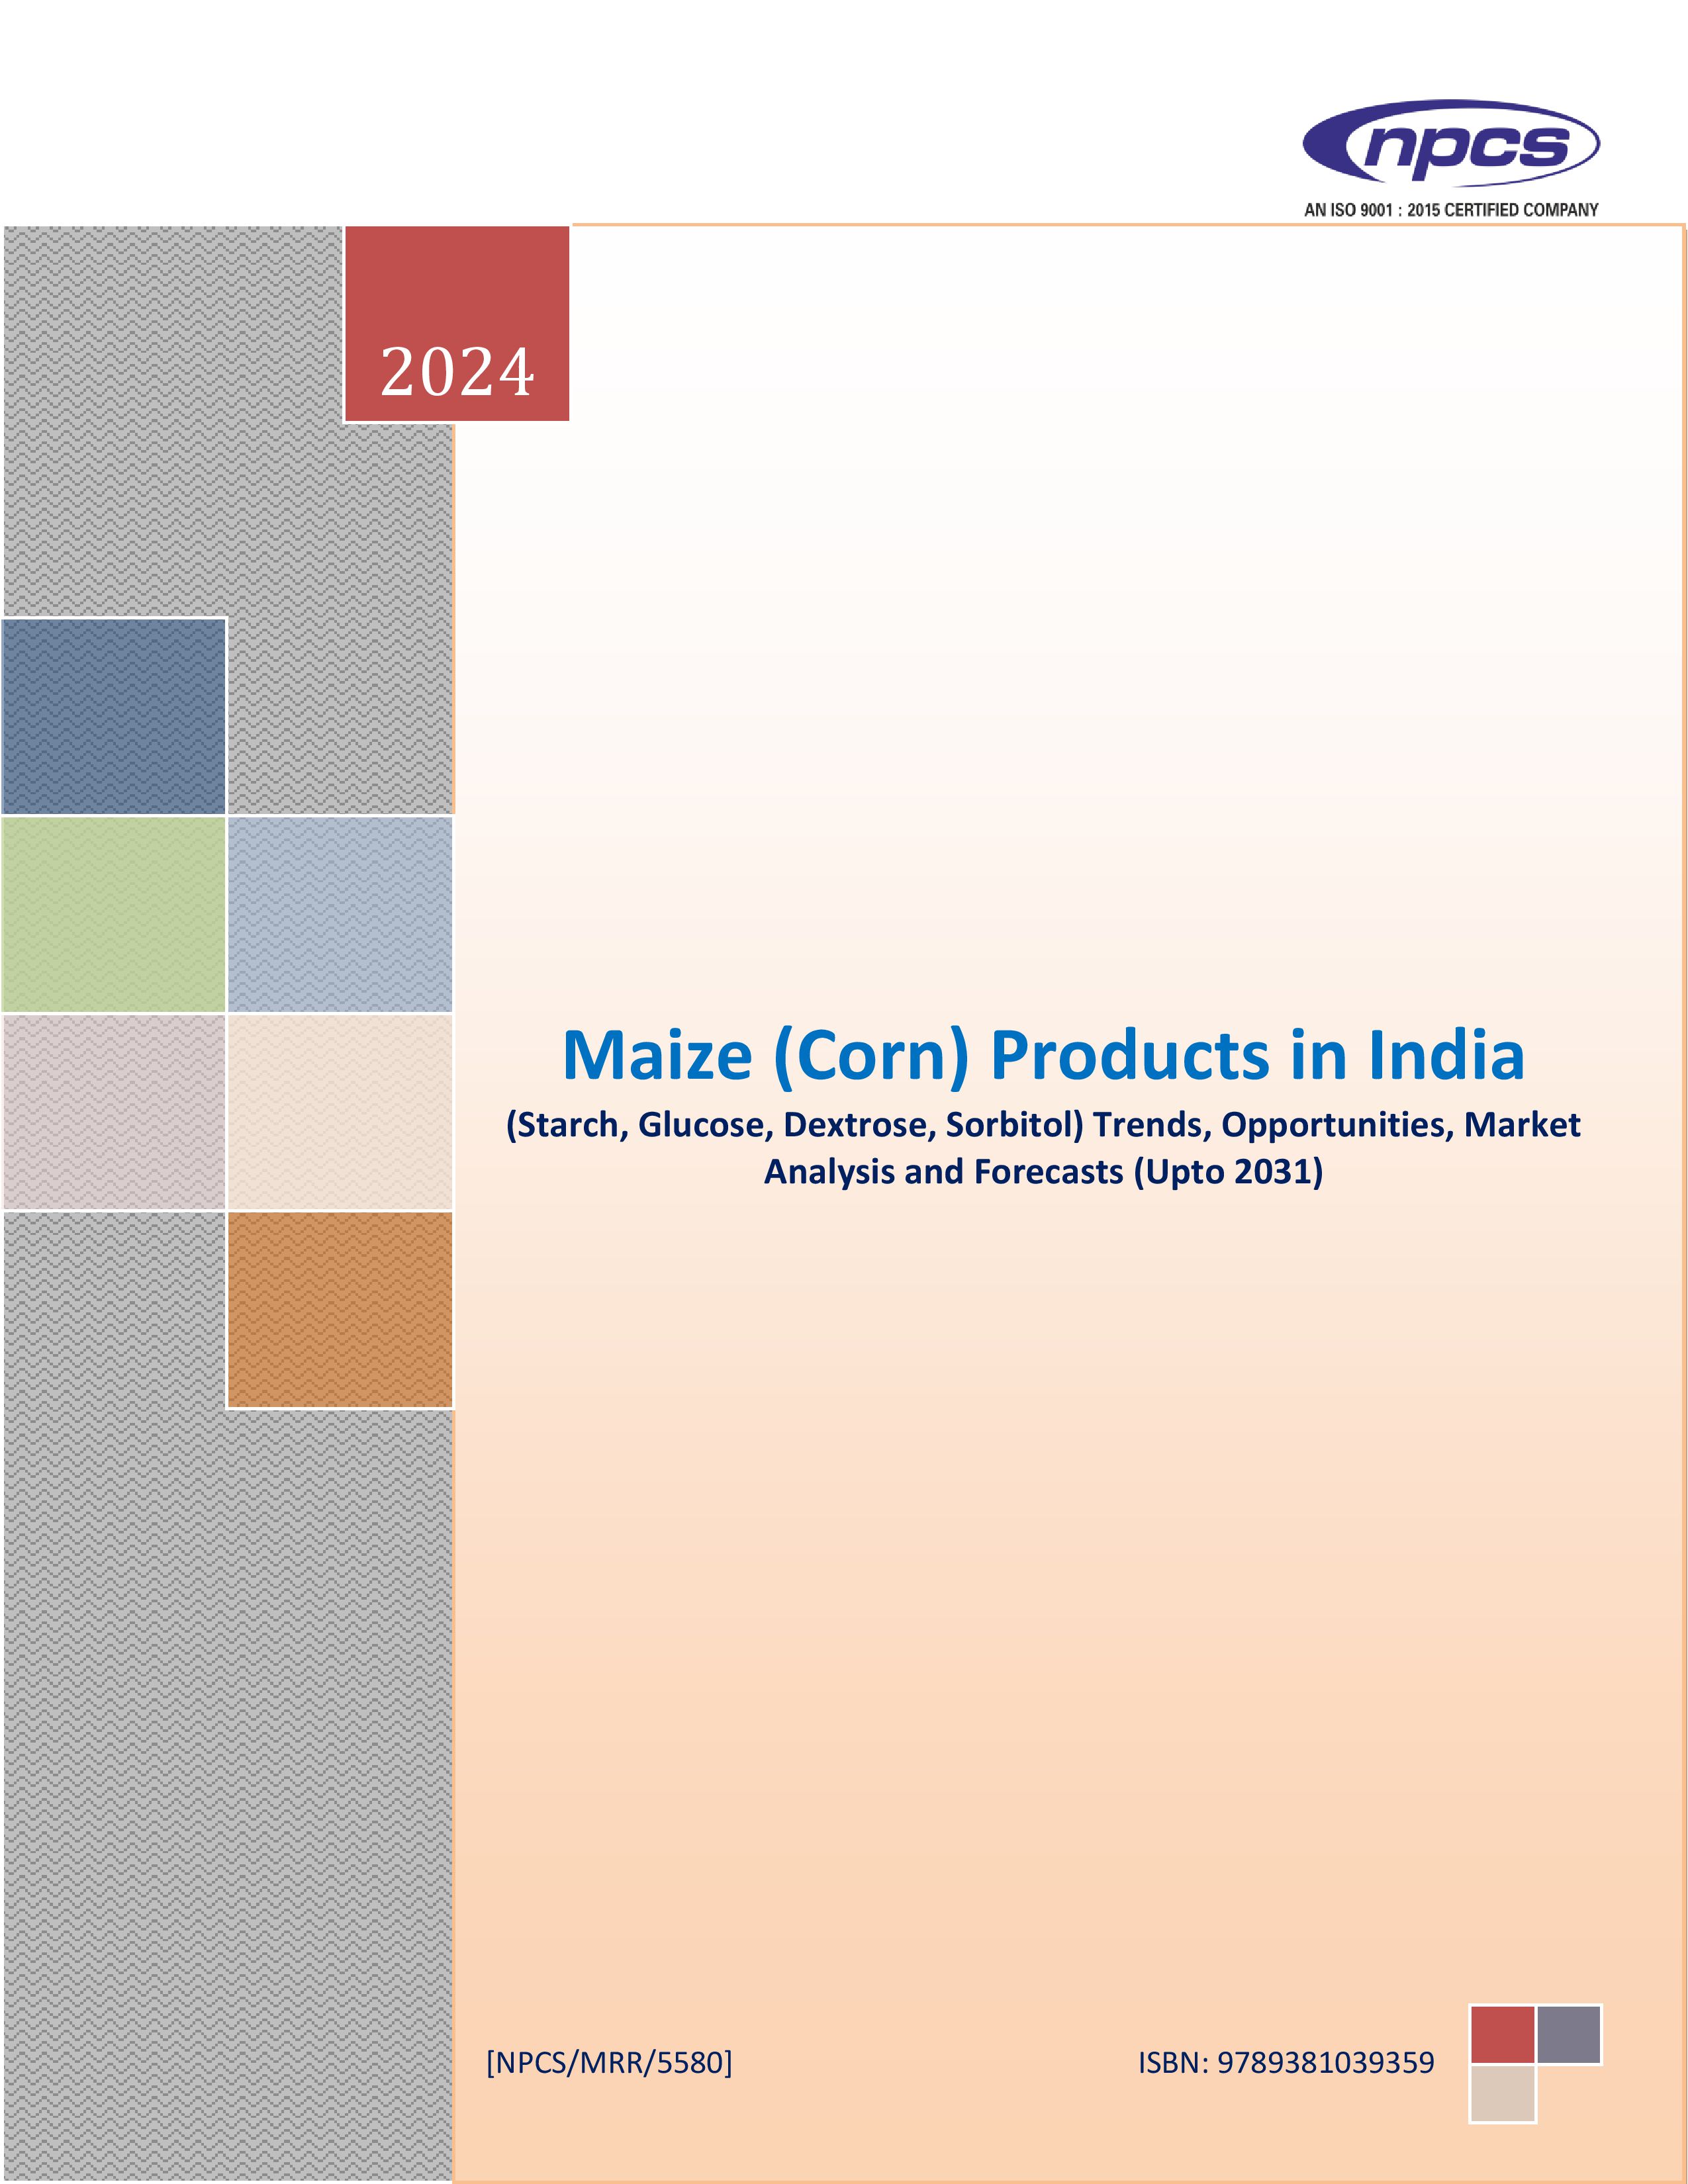 Maize (Corn) Products in India (Starch, Glucose, Dextrose, Sorbitol) Trends, Opportunities, Market Analysis and Forecasts (Upto 2030-31)